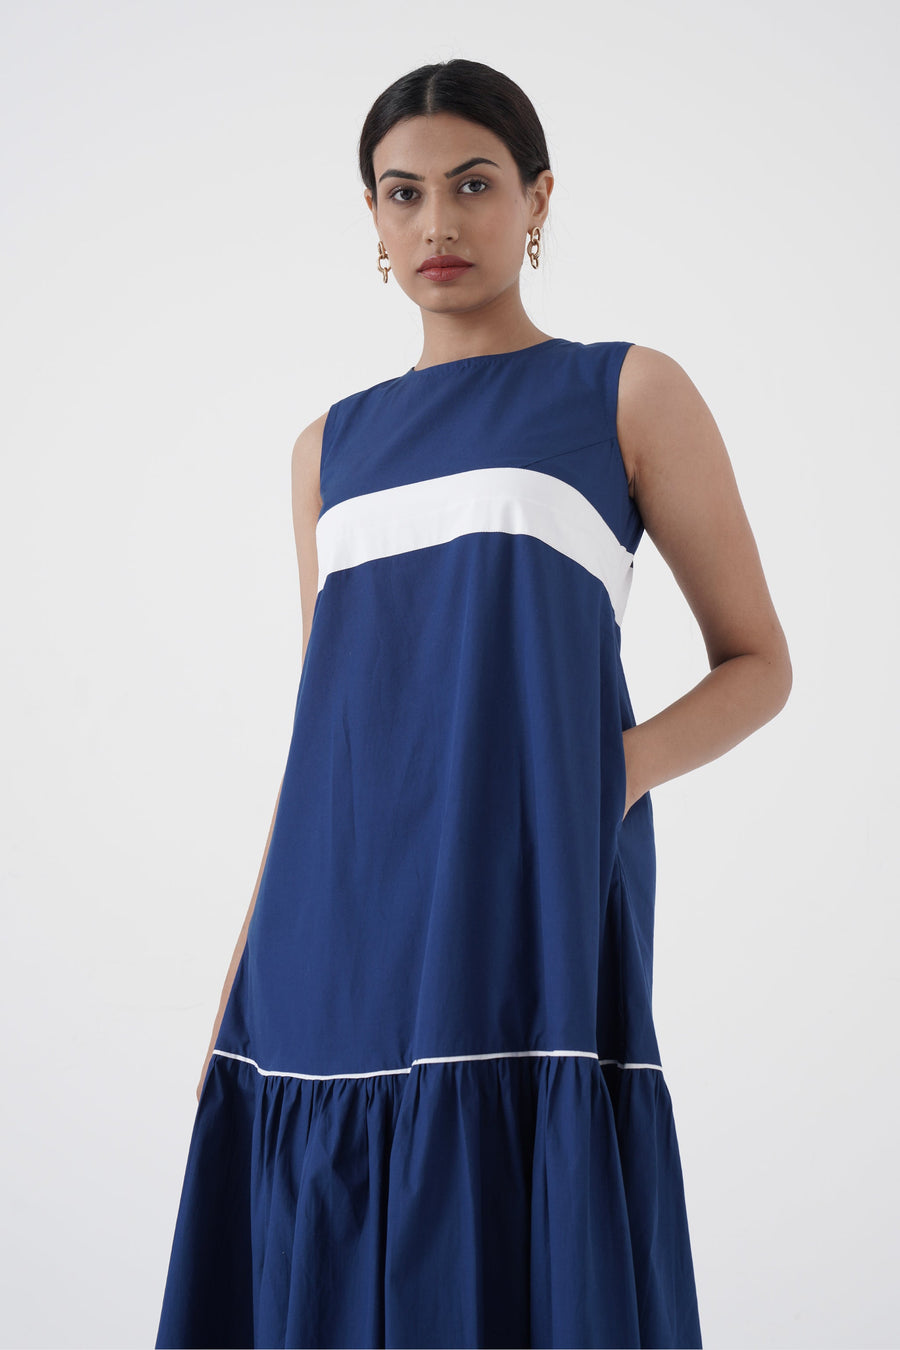 A Model Wearing Blue Pure Cotton Eurythmic - White patti on chest dress - Blue, curated by Only Ethikal